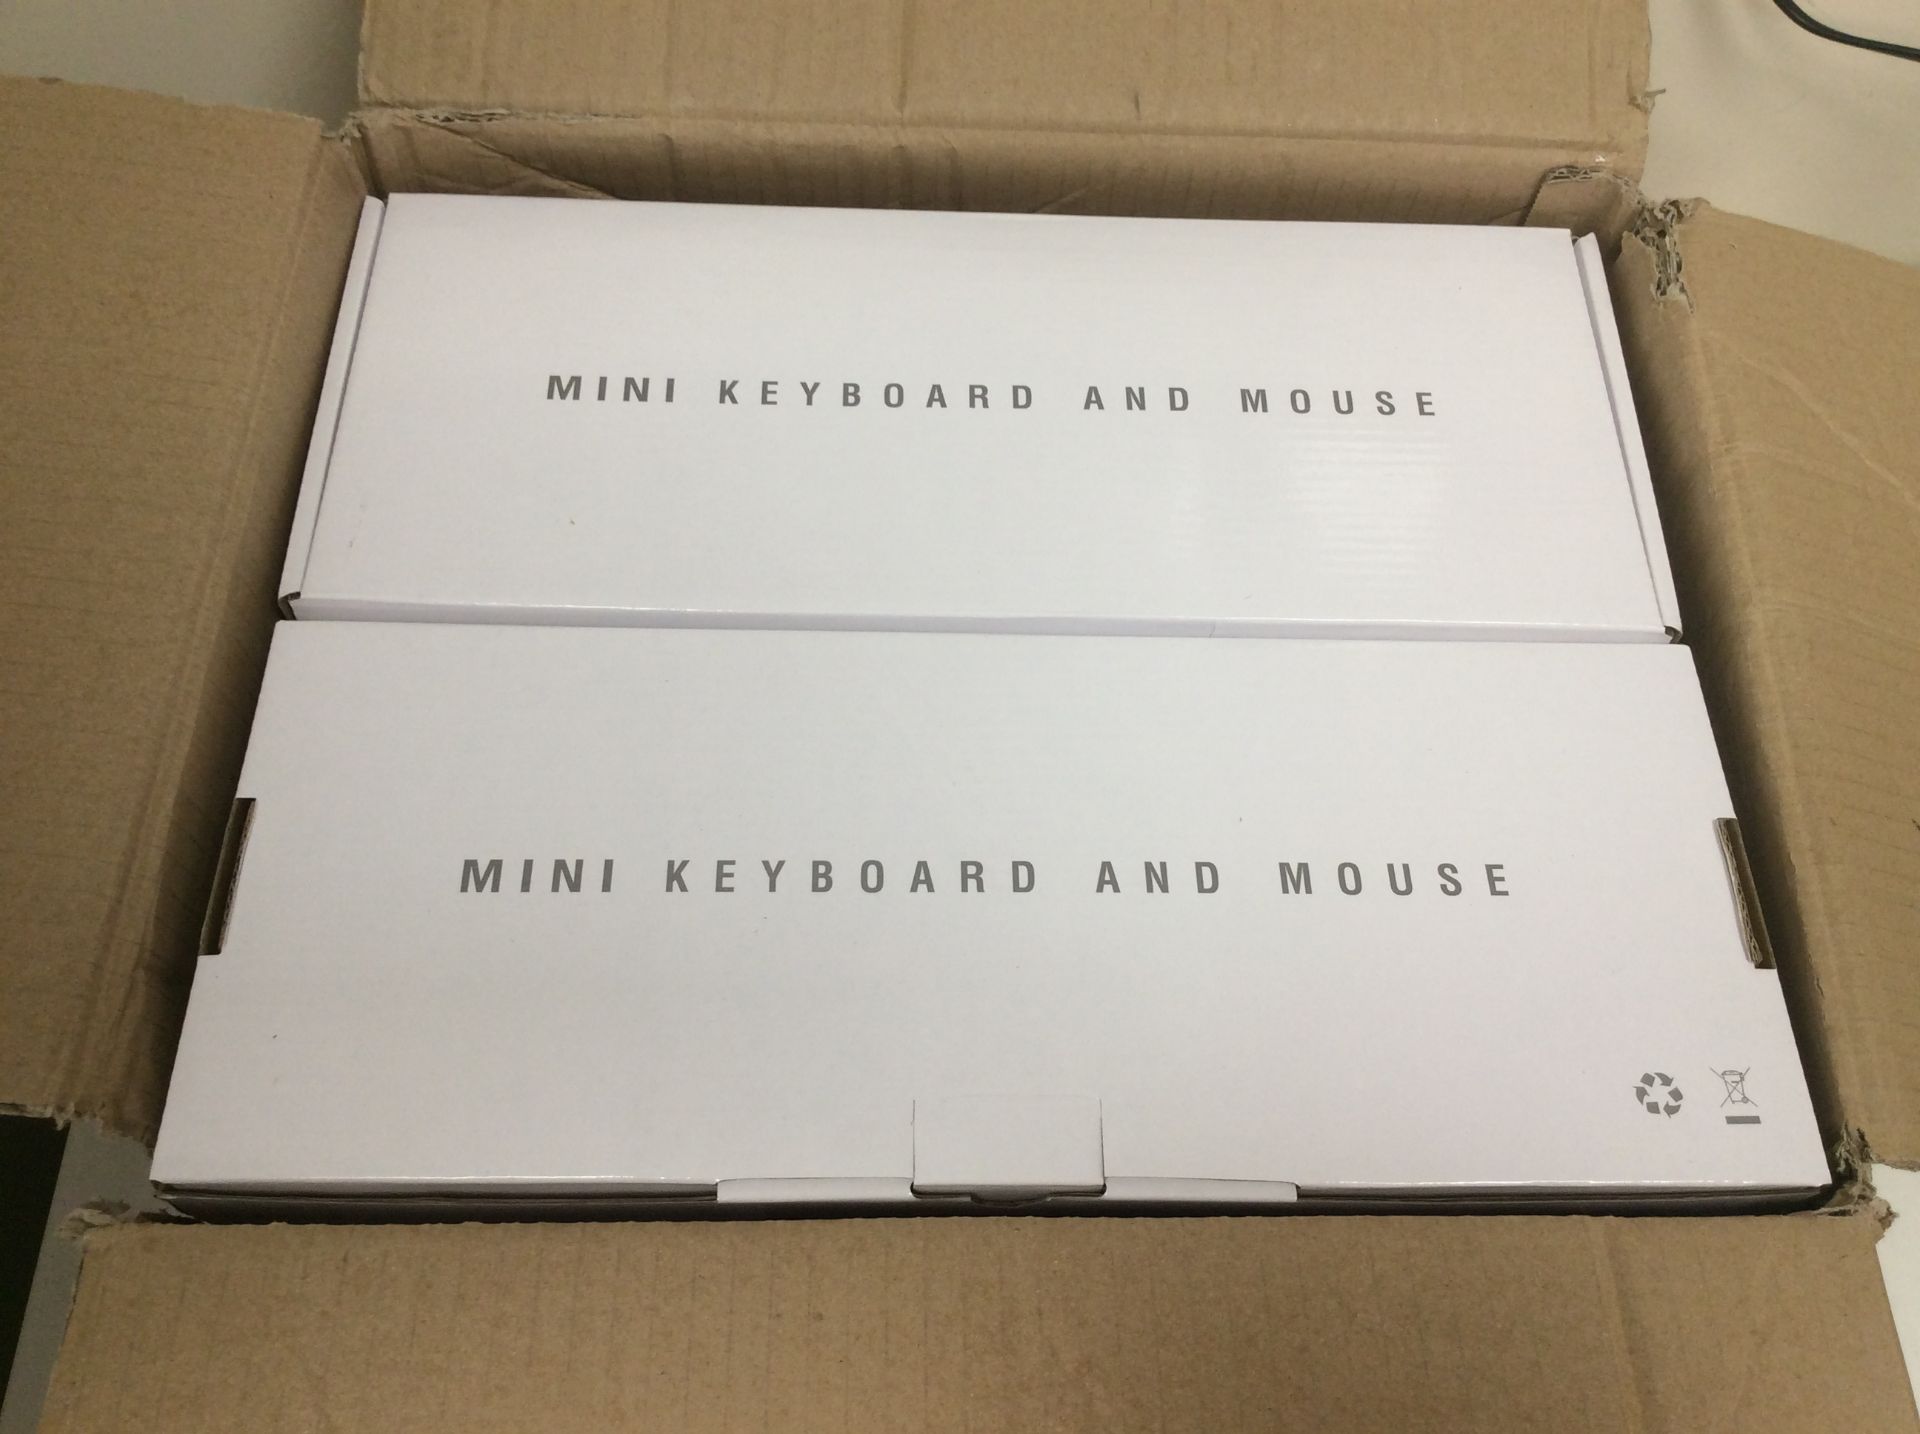 13x keyboard and mouse sets